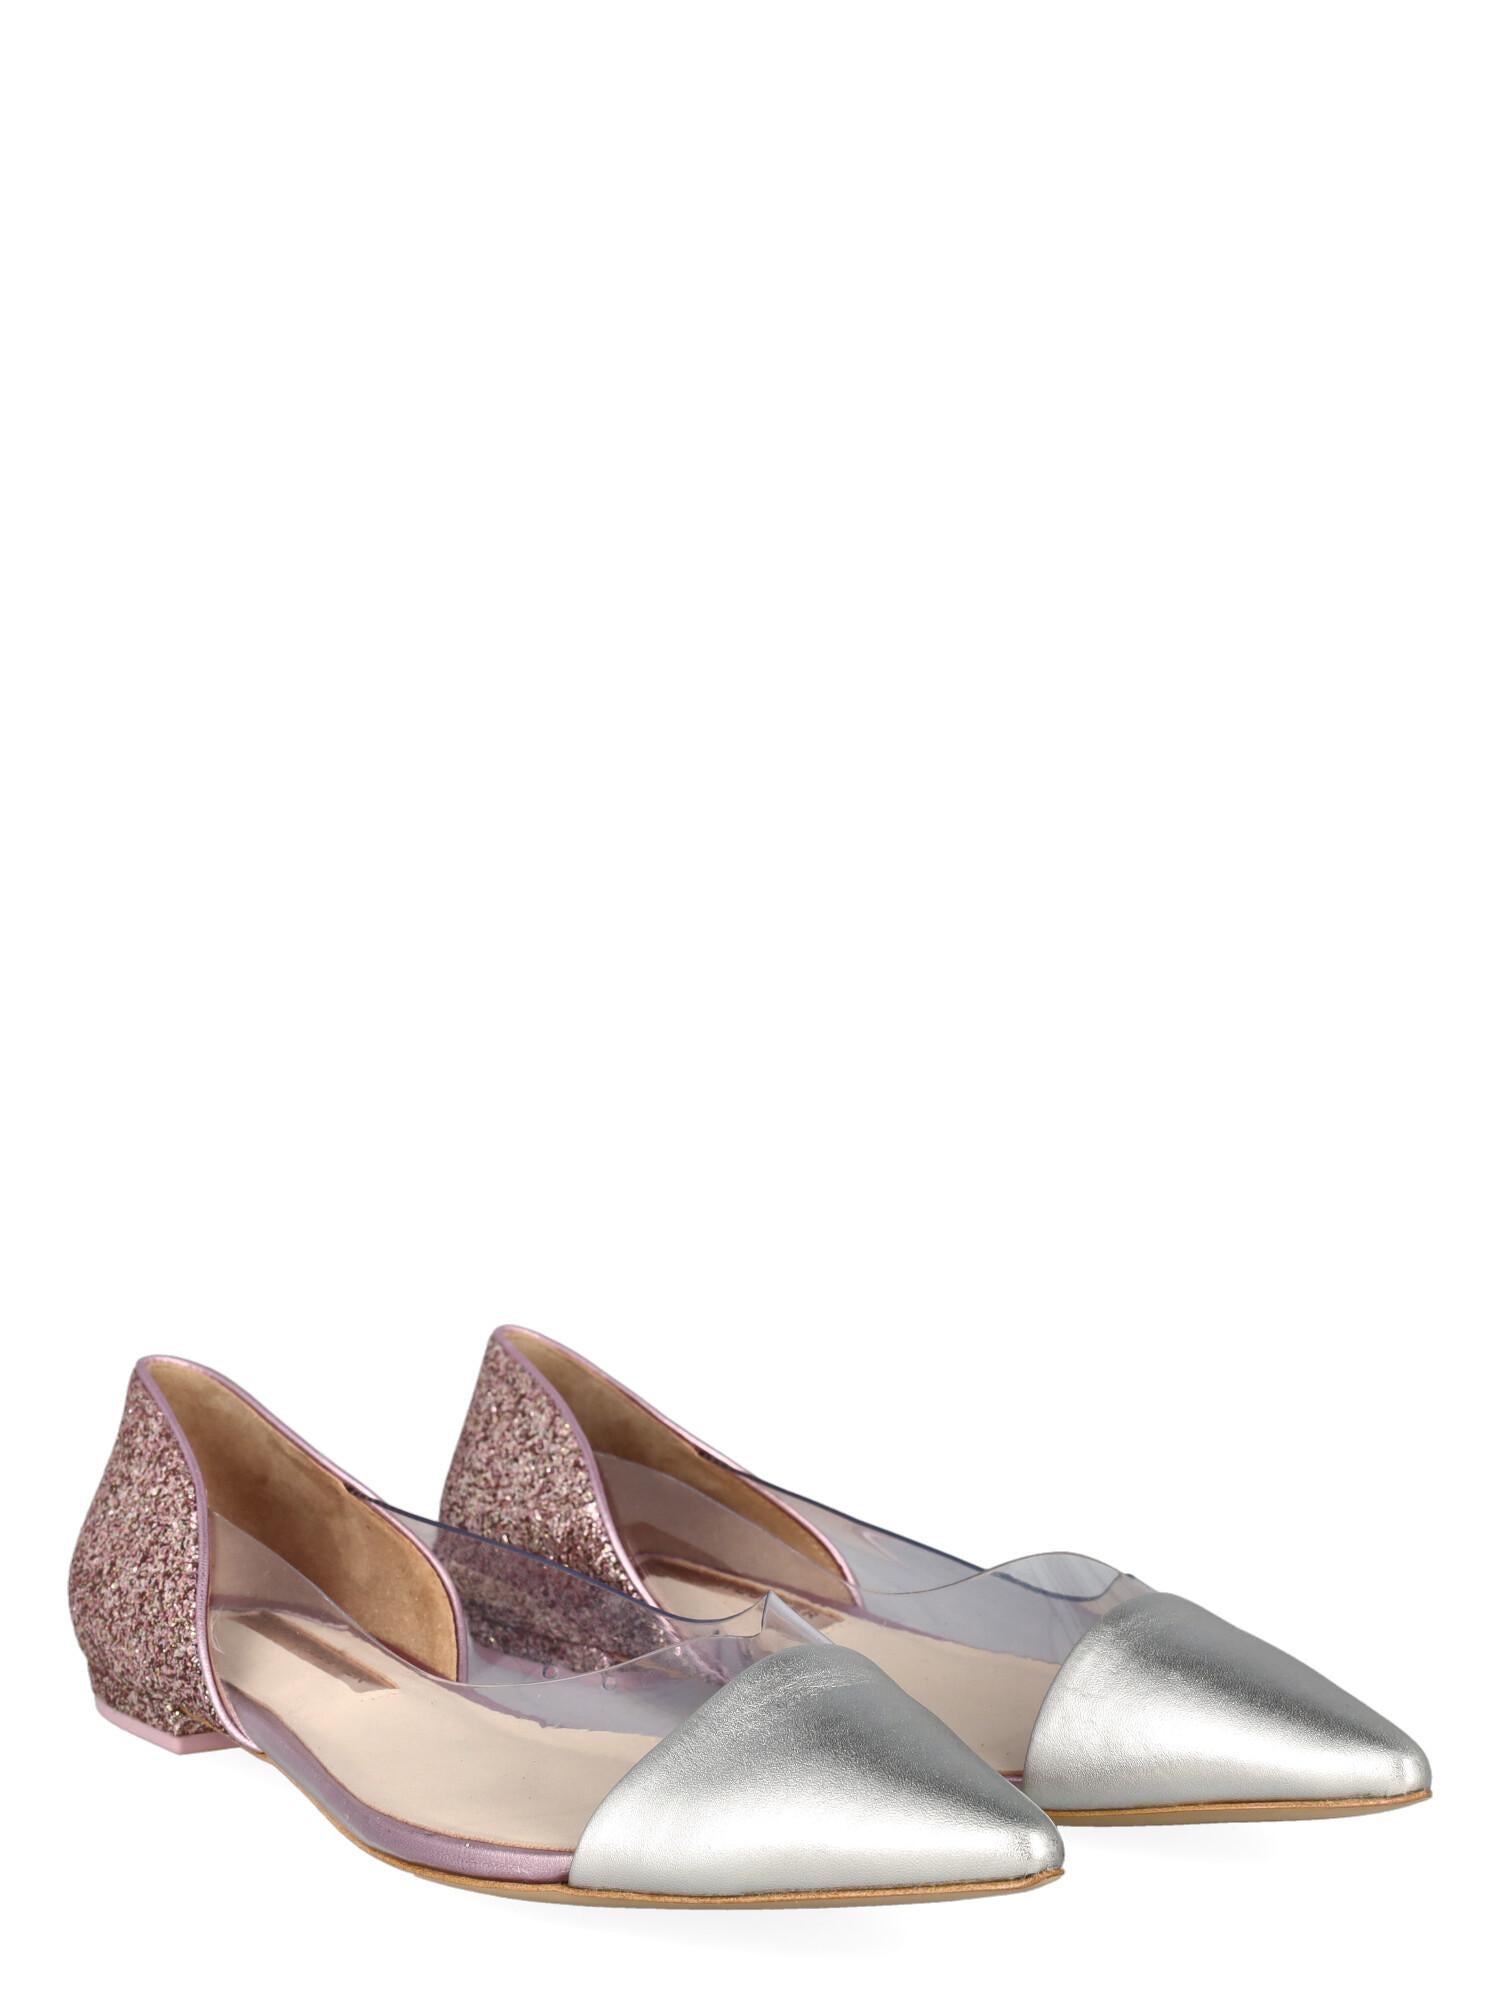 Product Description: Shoe, synthetic fibers, solid color, pointed toe, branded insole, leather insole, block heel, low and flat heel, glitter embellishment

Includes:
- Dust bag
	
Product Condition: Excellent
Sole: negligible marks. Upper: visible